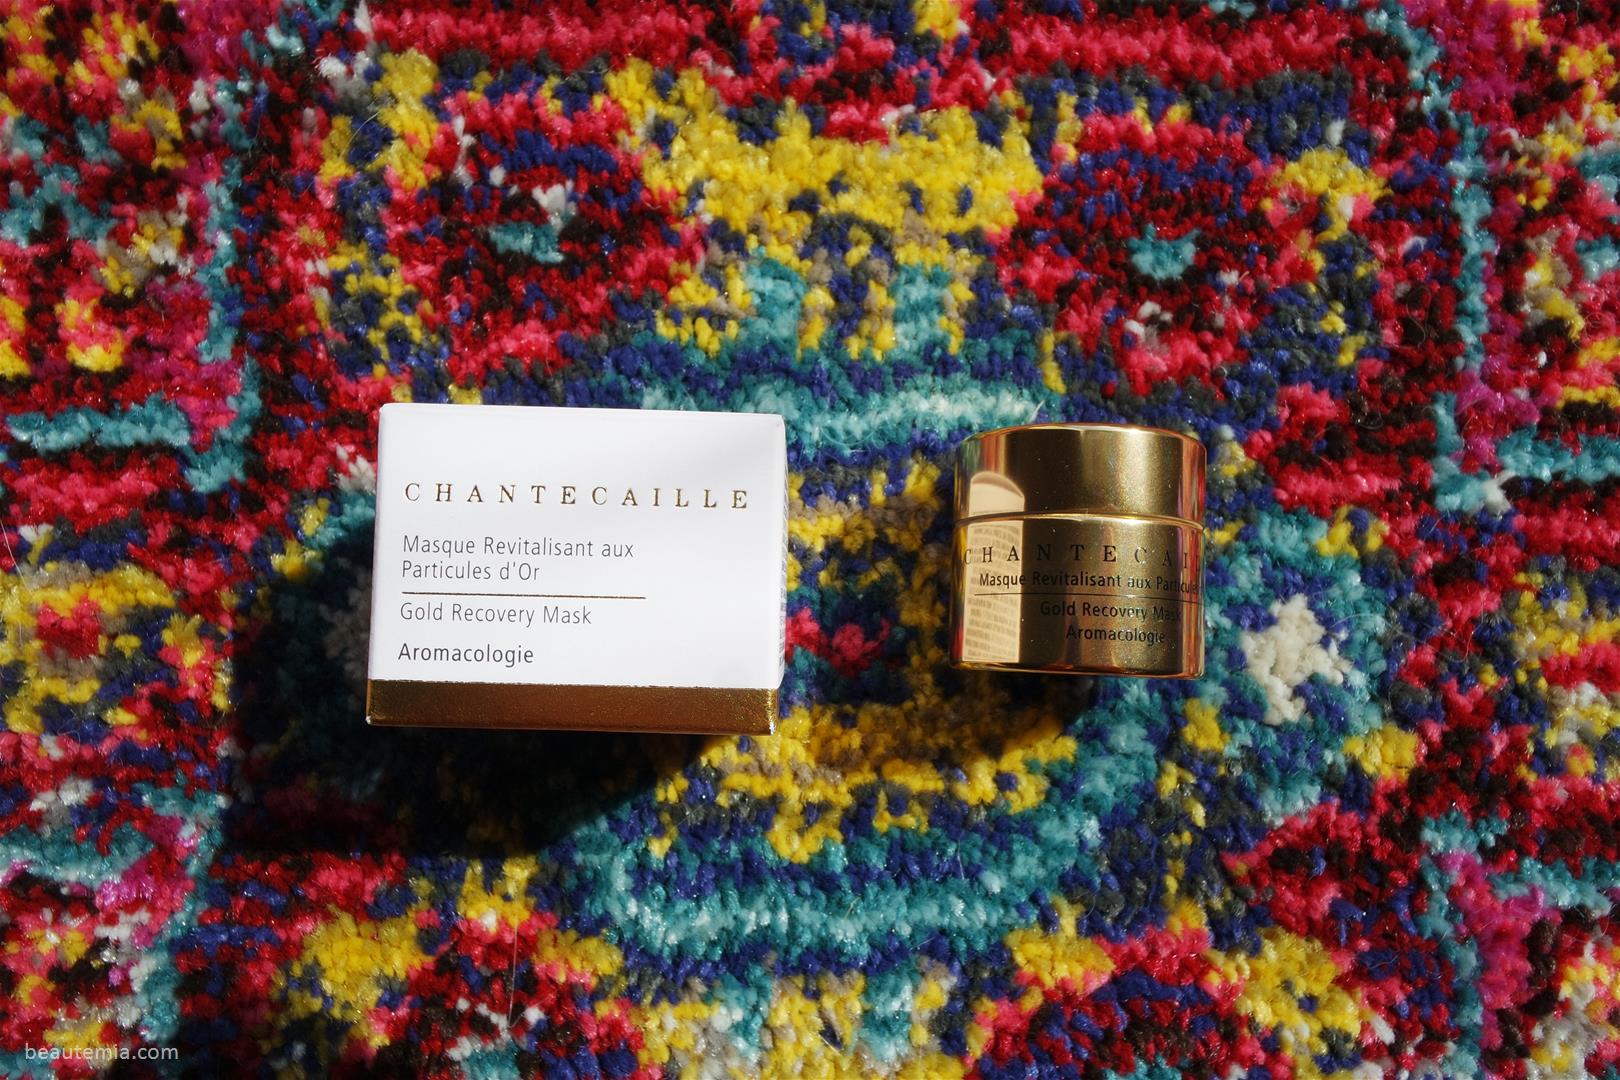 Chantecaille Gold Recovery Mask, Chantecaille Detox Clay Mask with Rosemary and Honey, Chantecaille, Chantecaille Bio Lifting Serum, Chantecaille nano gold, Chantecaille nano gold energizing cream, Chantecaille nano gold mask, Chantecaille nano gold firming treatment, Chantecaille vital essence, Chantecaille mask, Chantecaille Rose de Mai cream, Chantecaille Rose de Mai oil, Chantecaille lifting serum, Chantecaille Chantecaille skincare, luxury skincare, luxury beauty, Chantecaille lip chic, Chantecaille Just skin tinted moisturizer, Chantecaille foundation, cruelty free brand, cruelty free skincare, may lindstrom, kat burki, skincare for pregnancy & la prairie cellular radiance cream